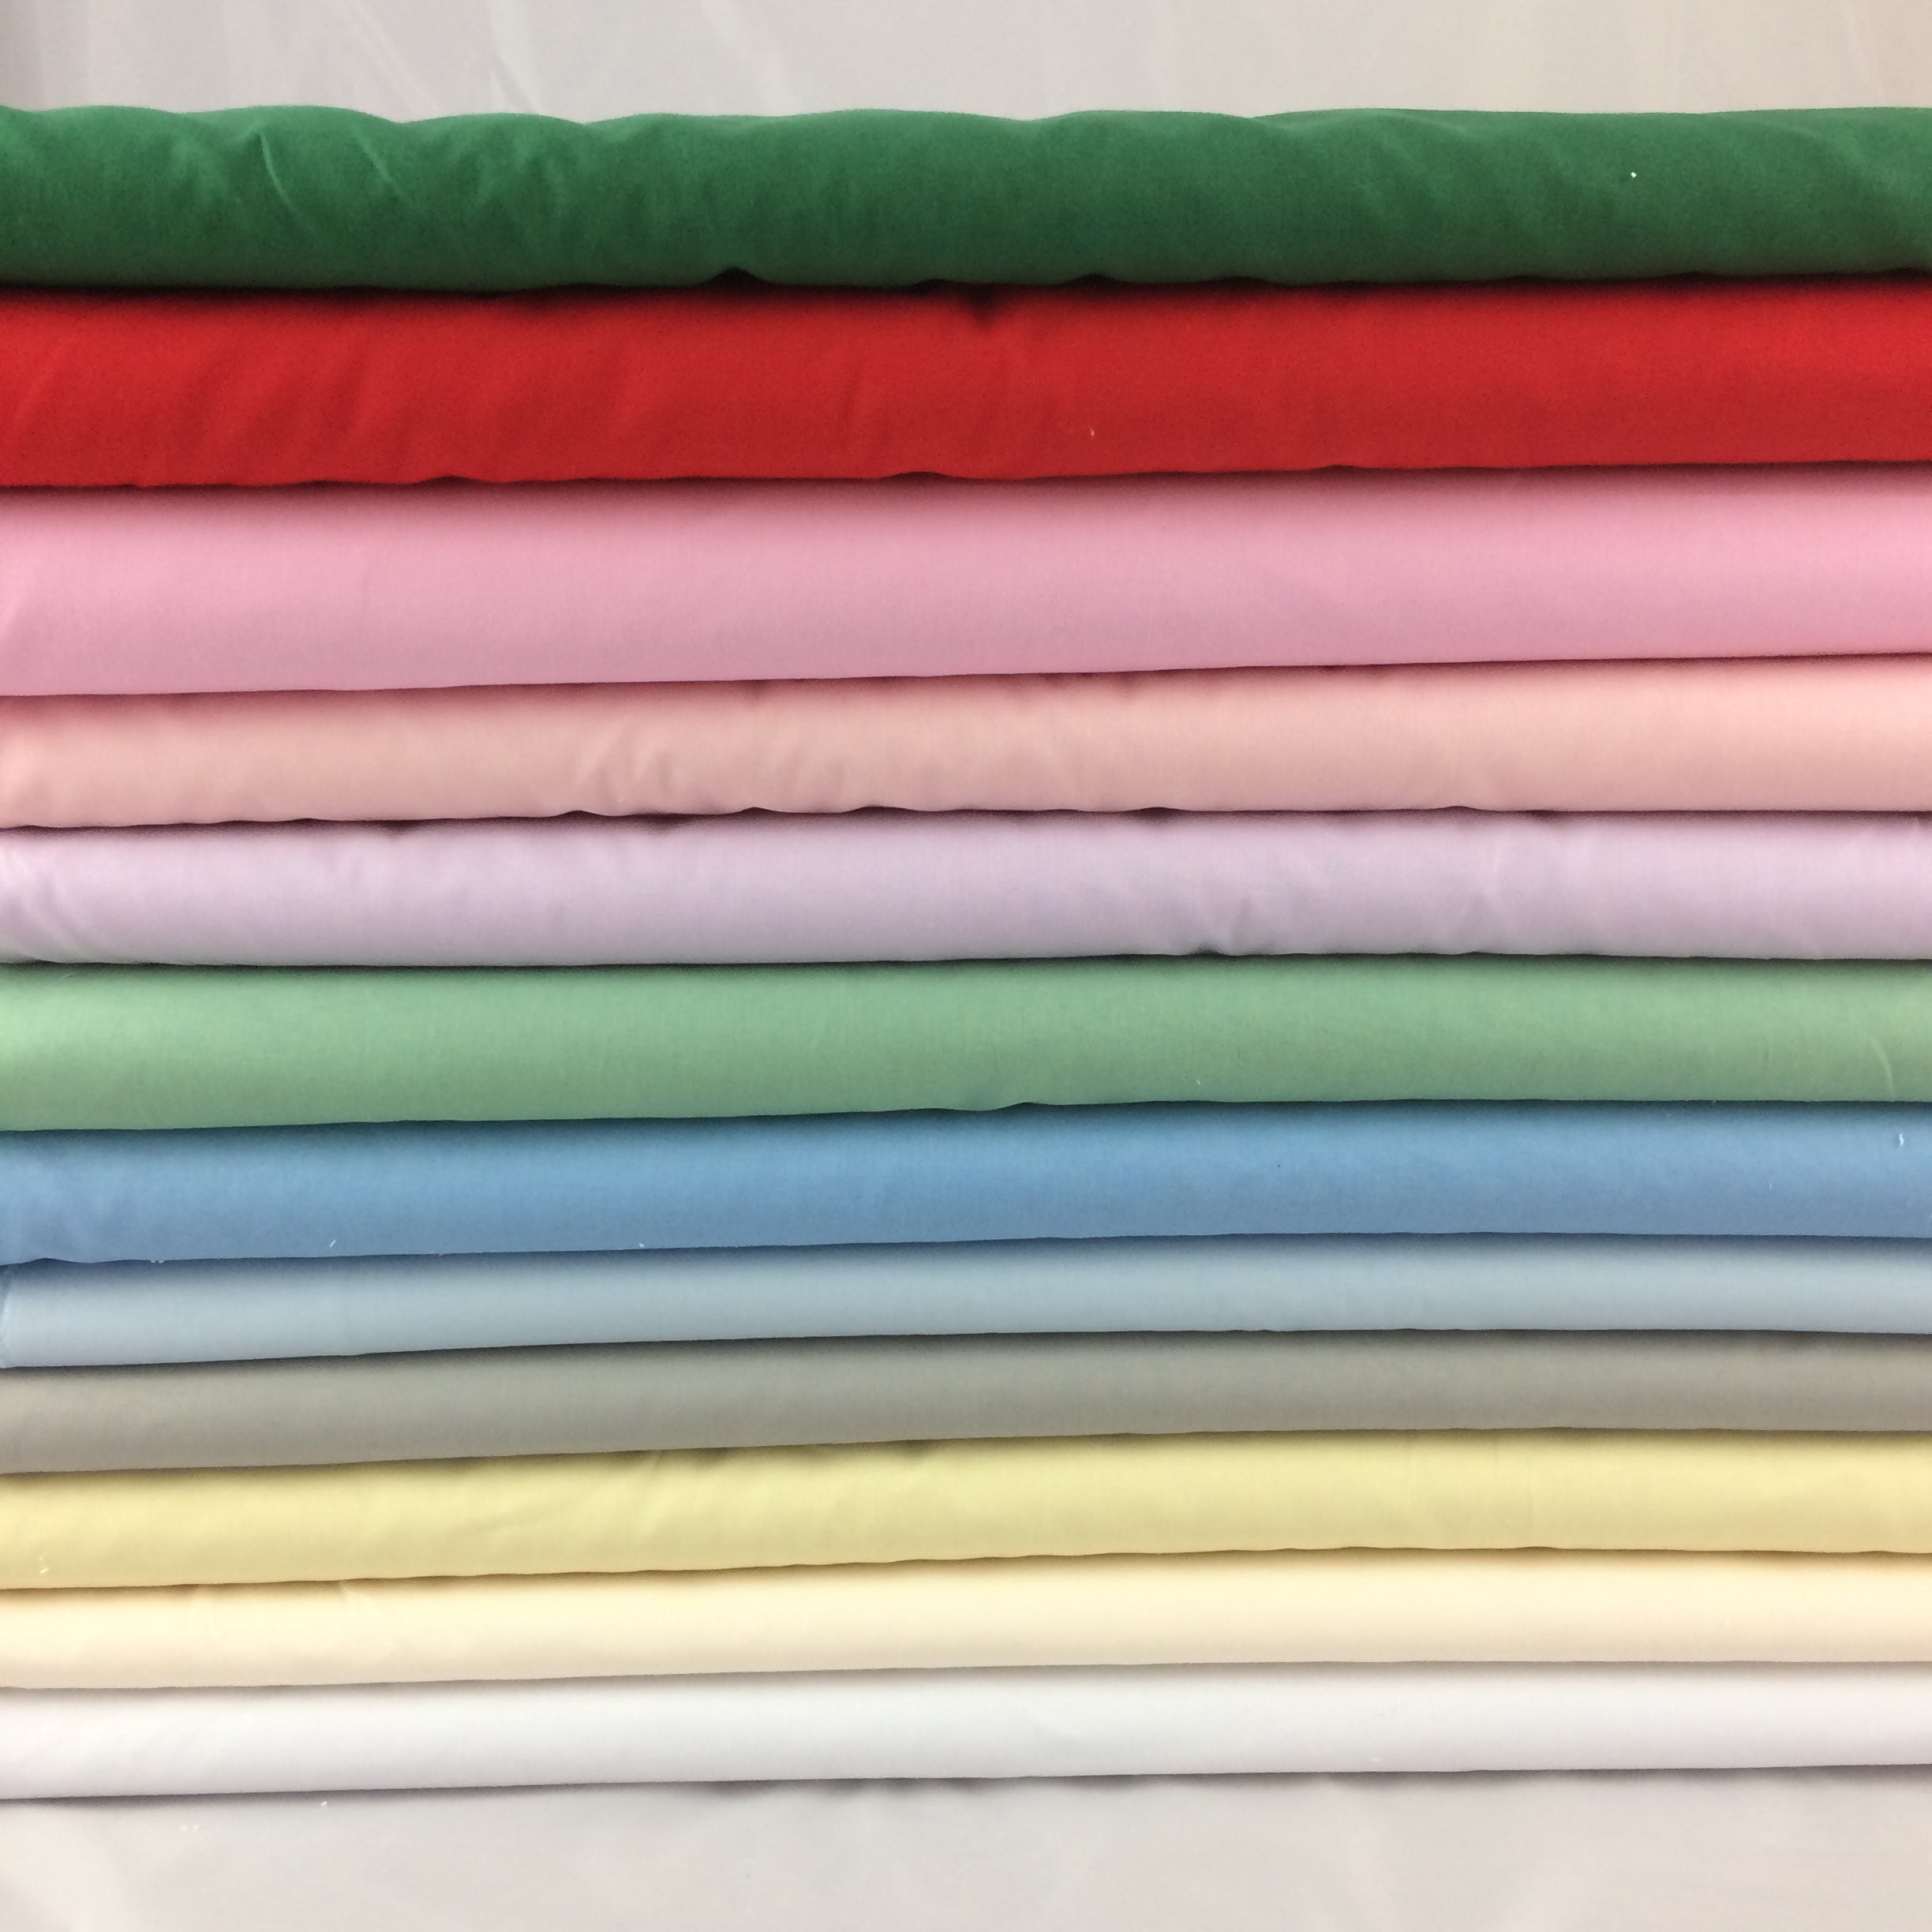 Klona cotton fabric great for quilting